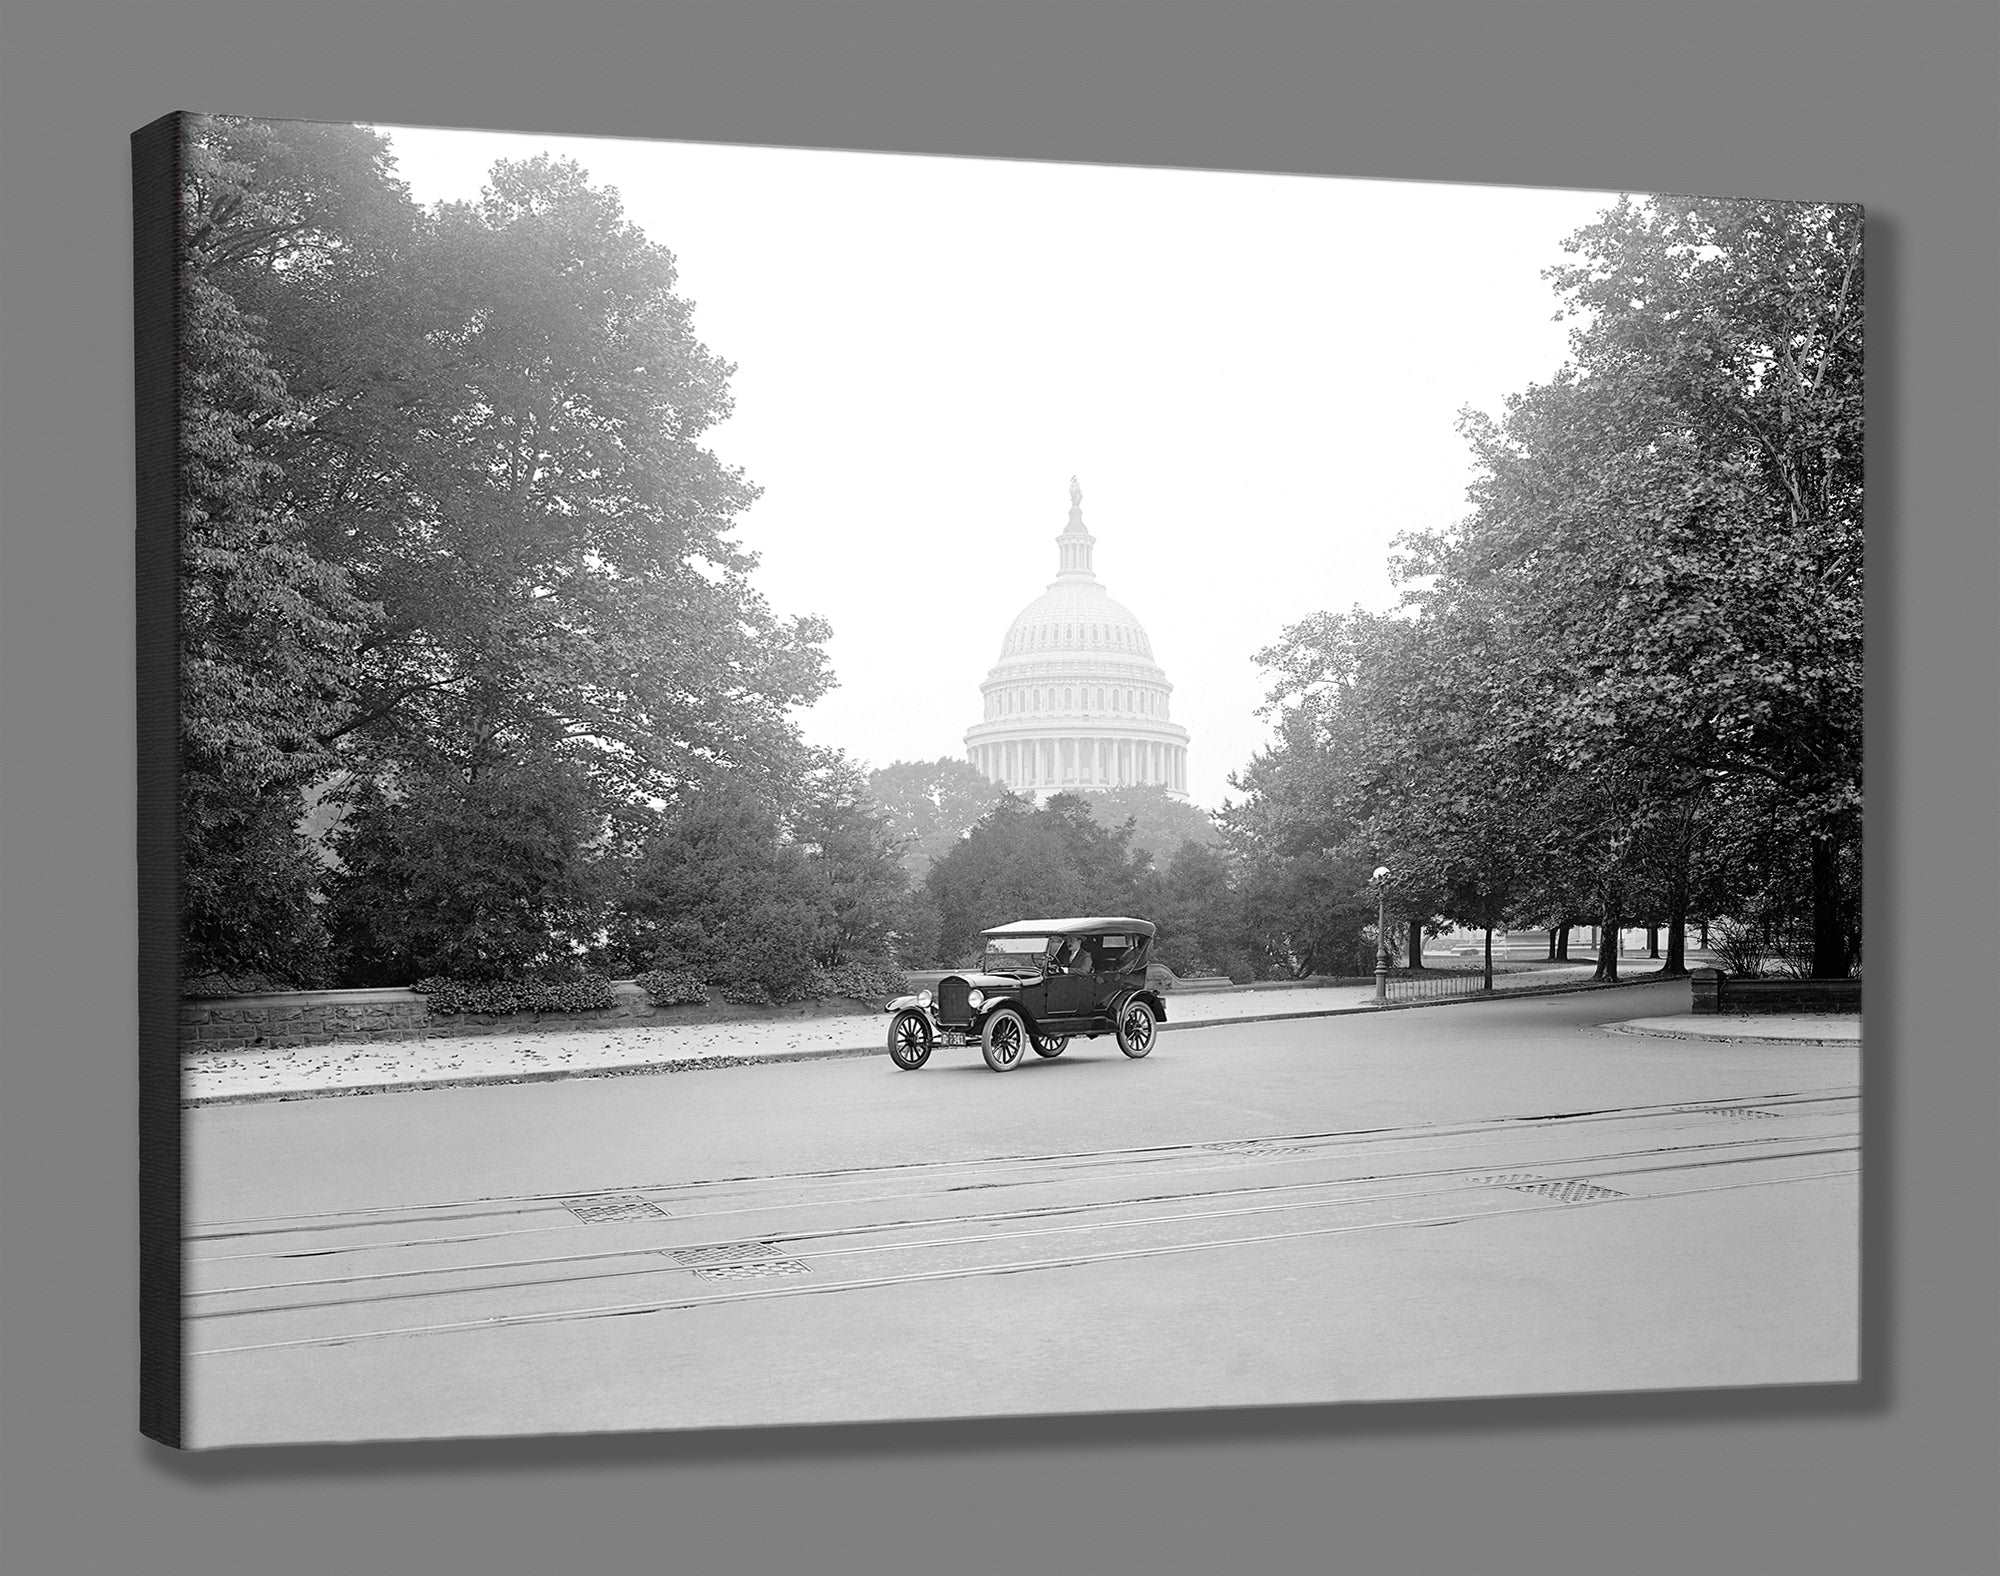 A mockup canvas print of a vintage photograph of a Ford Touring Car in Washington DC